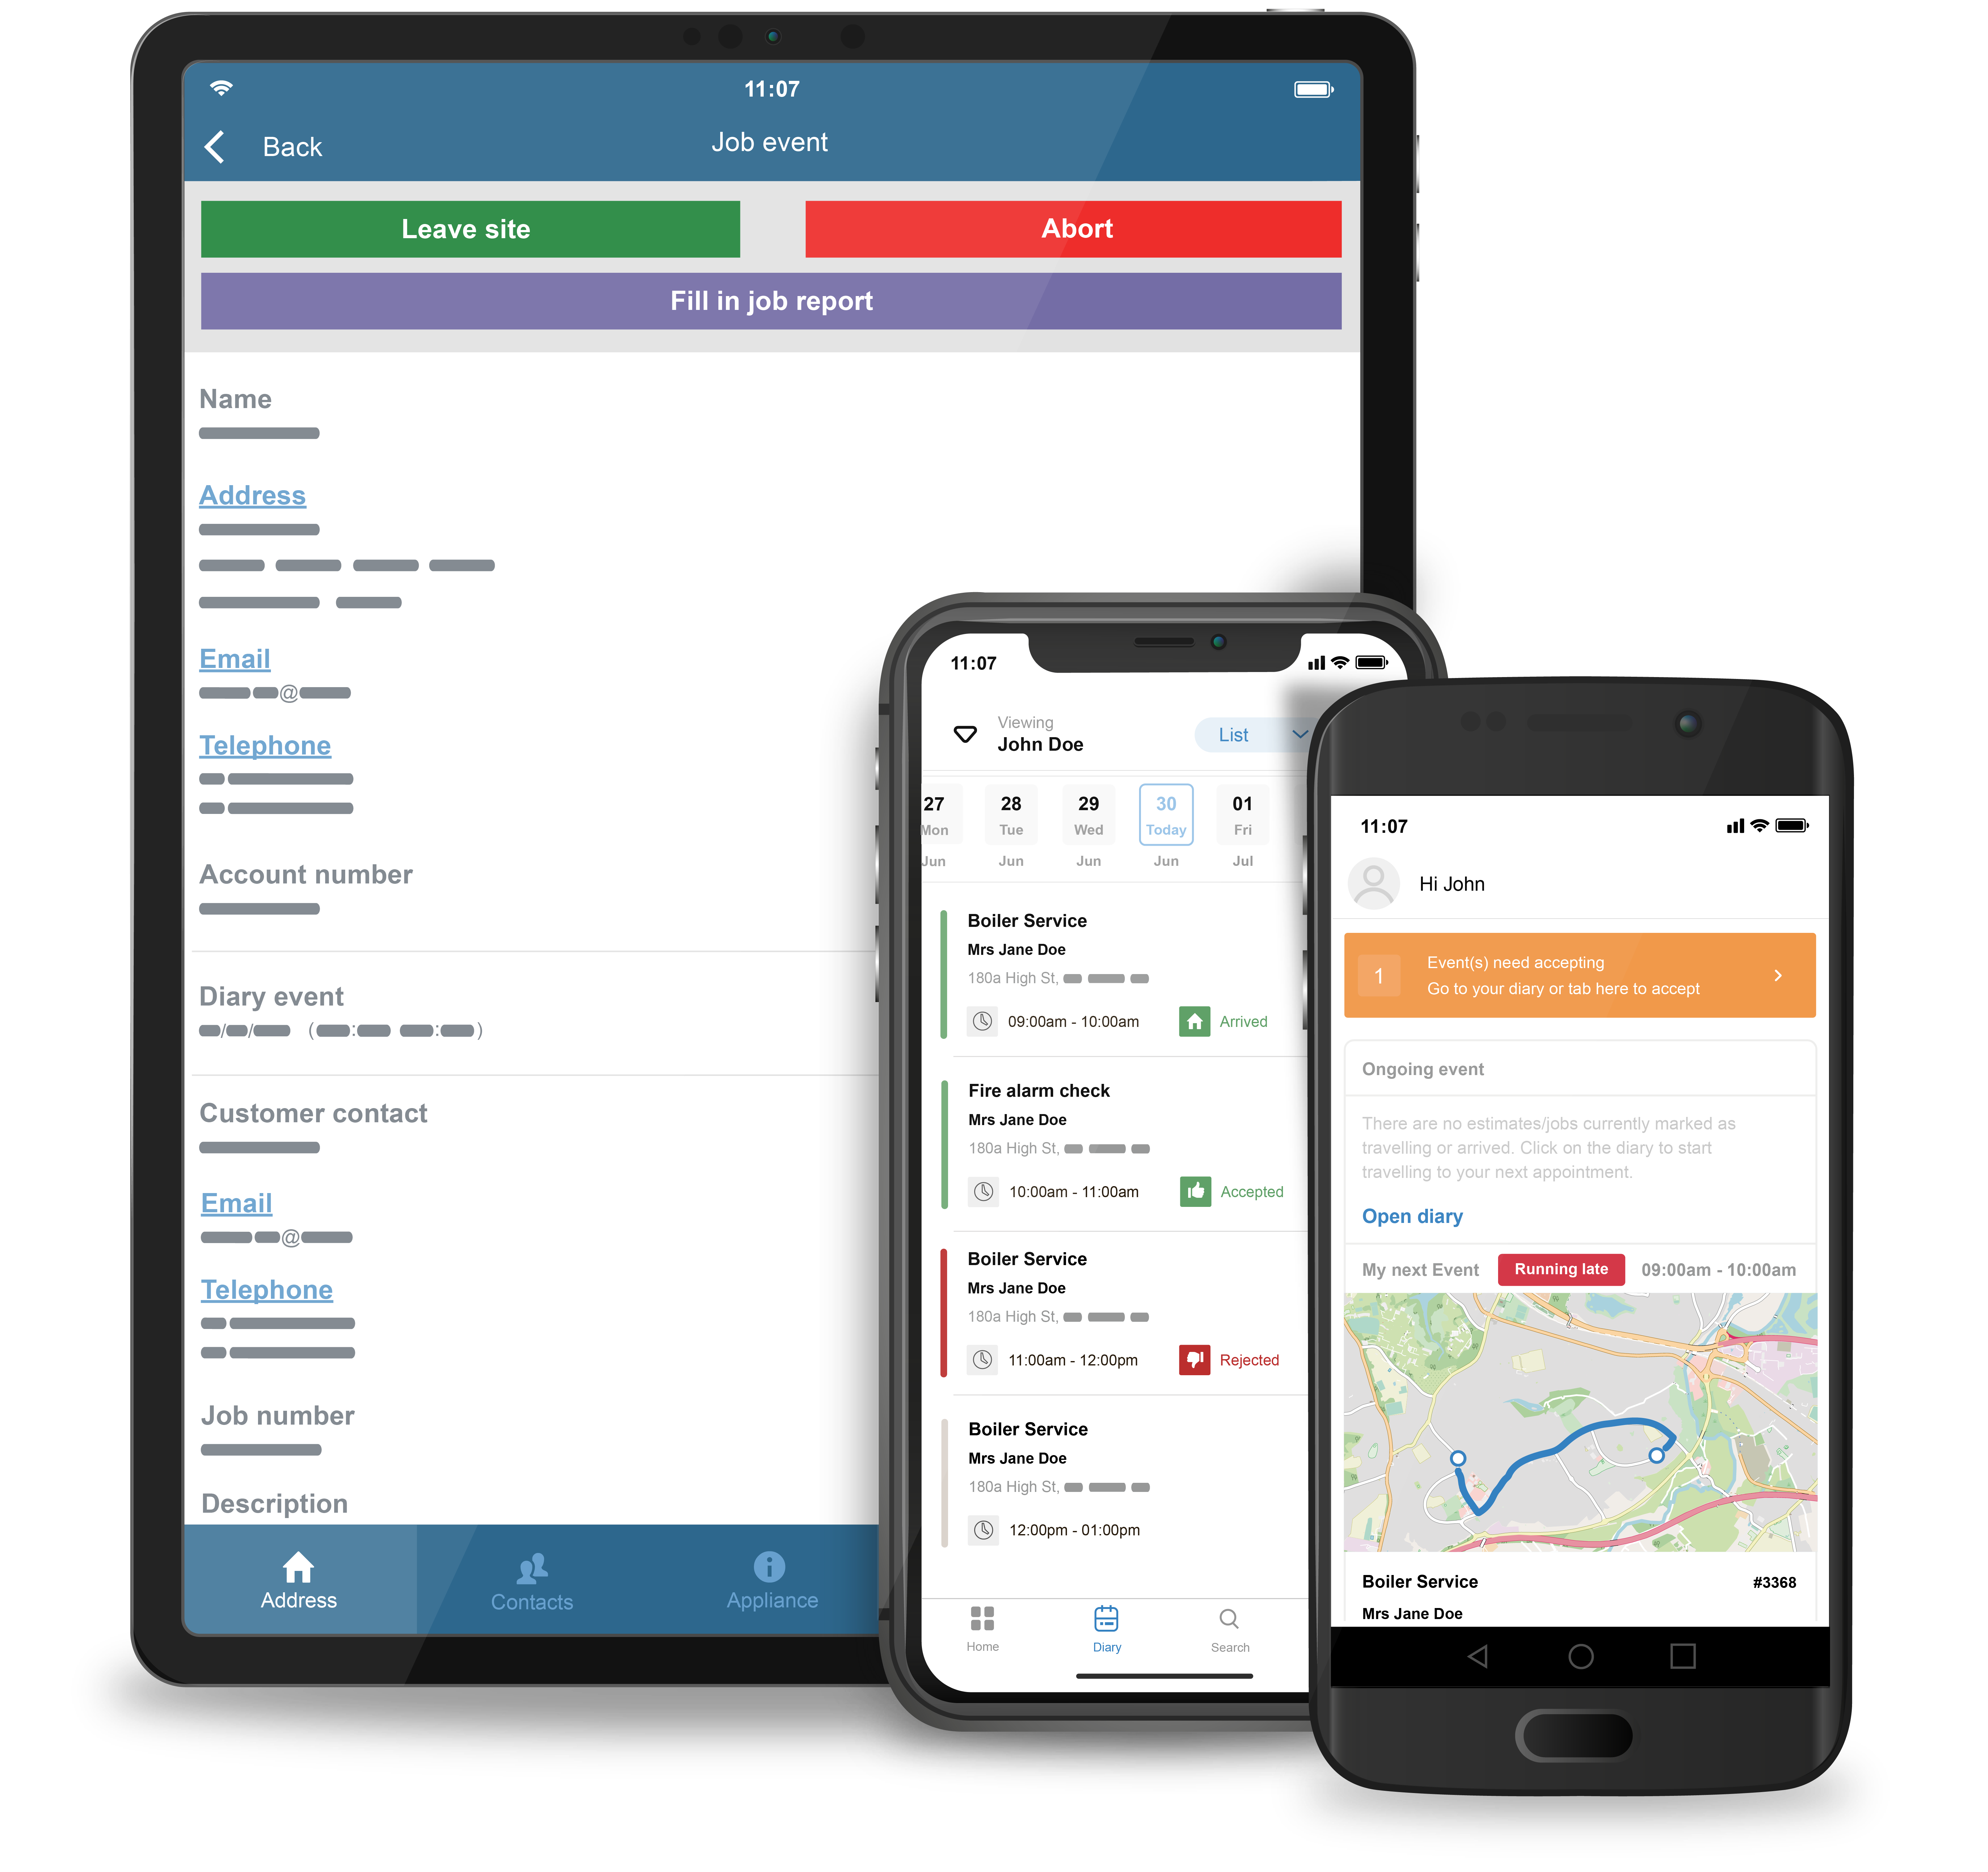 Commusoft Software - Commusoft's Mobile App is available on iOS and Android devices